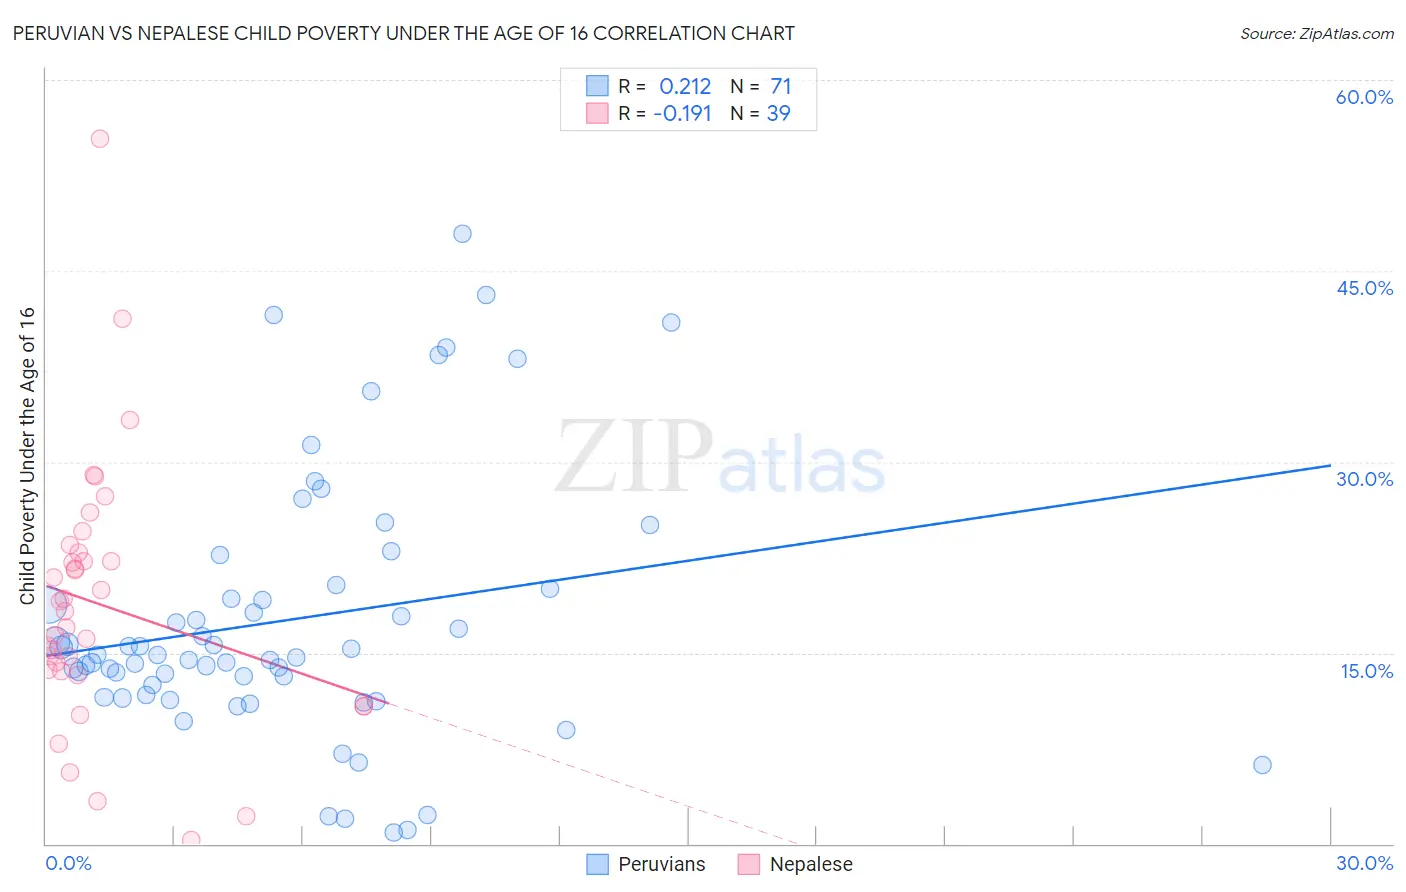 Peruvian vs Nepalese Child Poverty Under the Age of 16